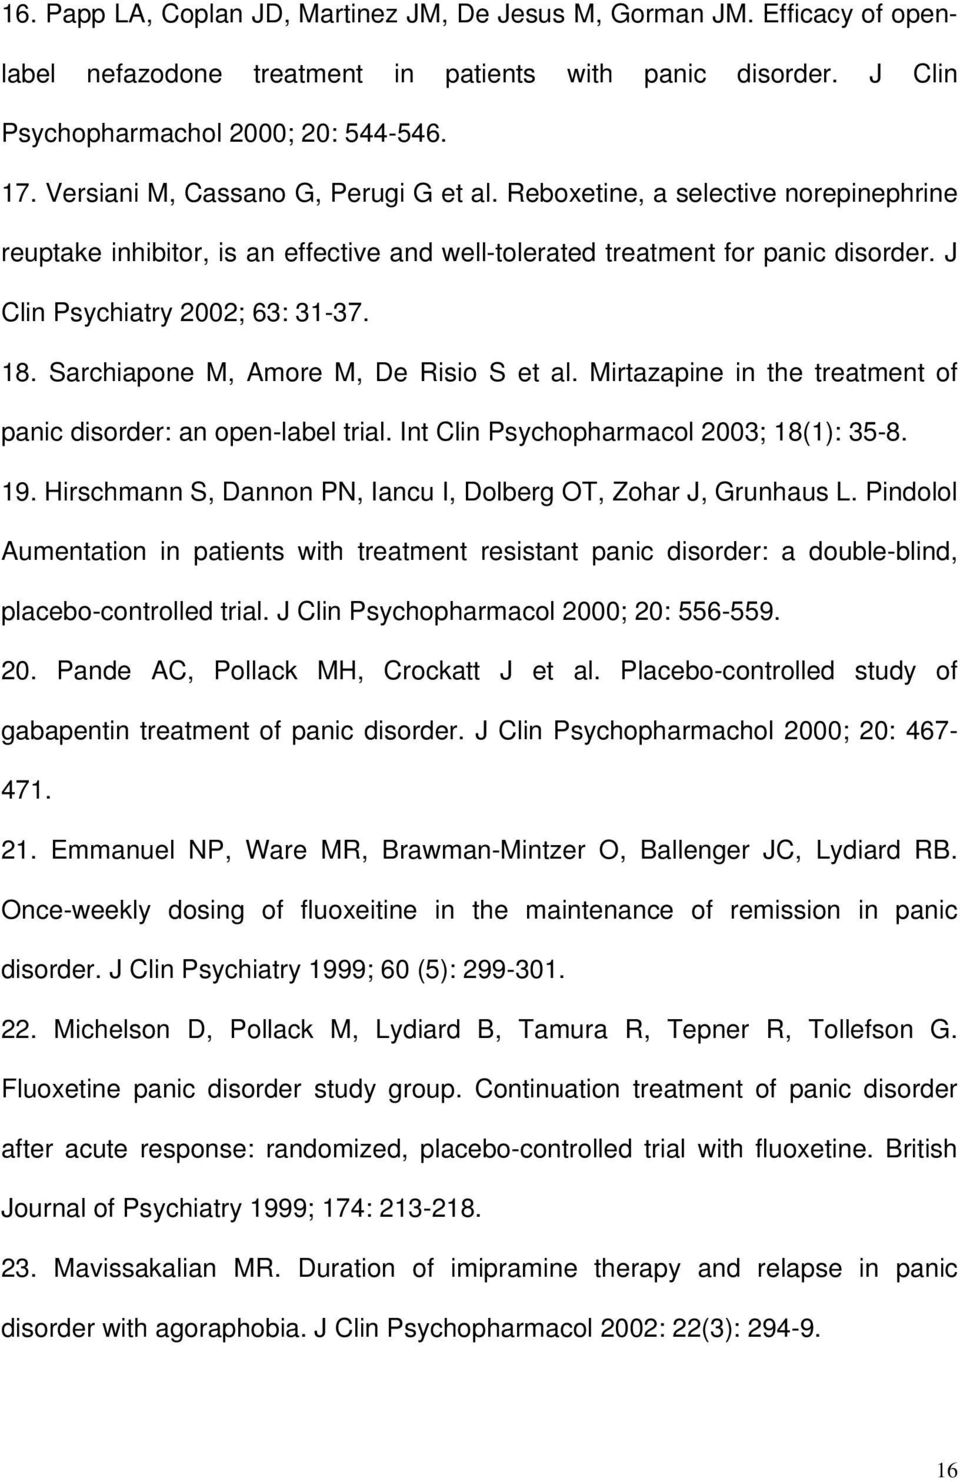 18. Sarchiapone M, Amore M, De Risio S et al. Mirtazapine in the treatment of panic disorder: an open-label trial. Int Clin Psychopharmacol 2003; 18(1): 35-8. 19.